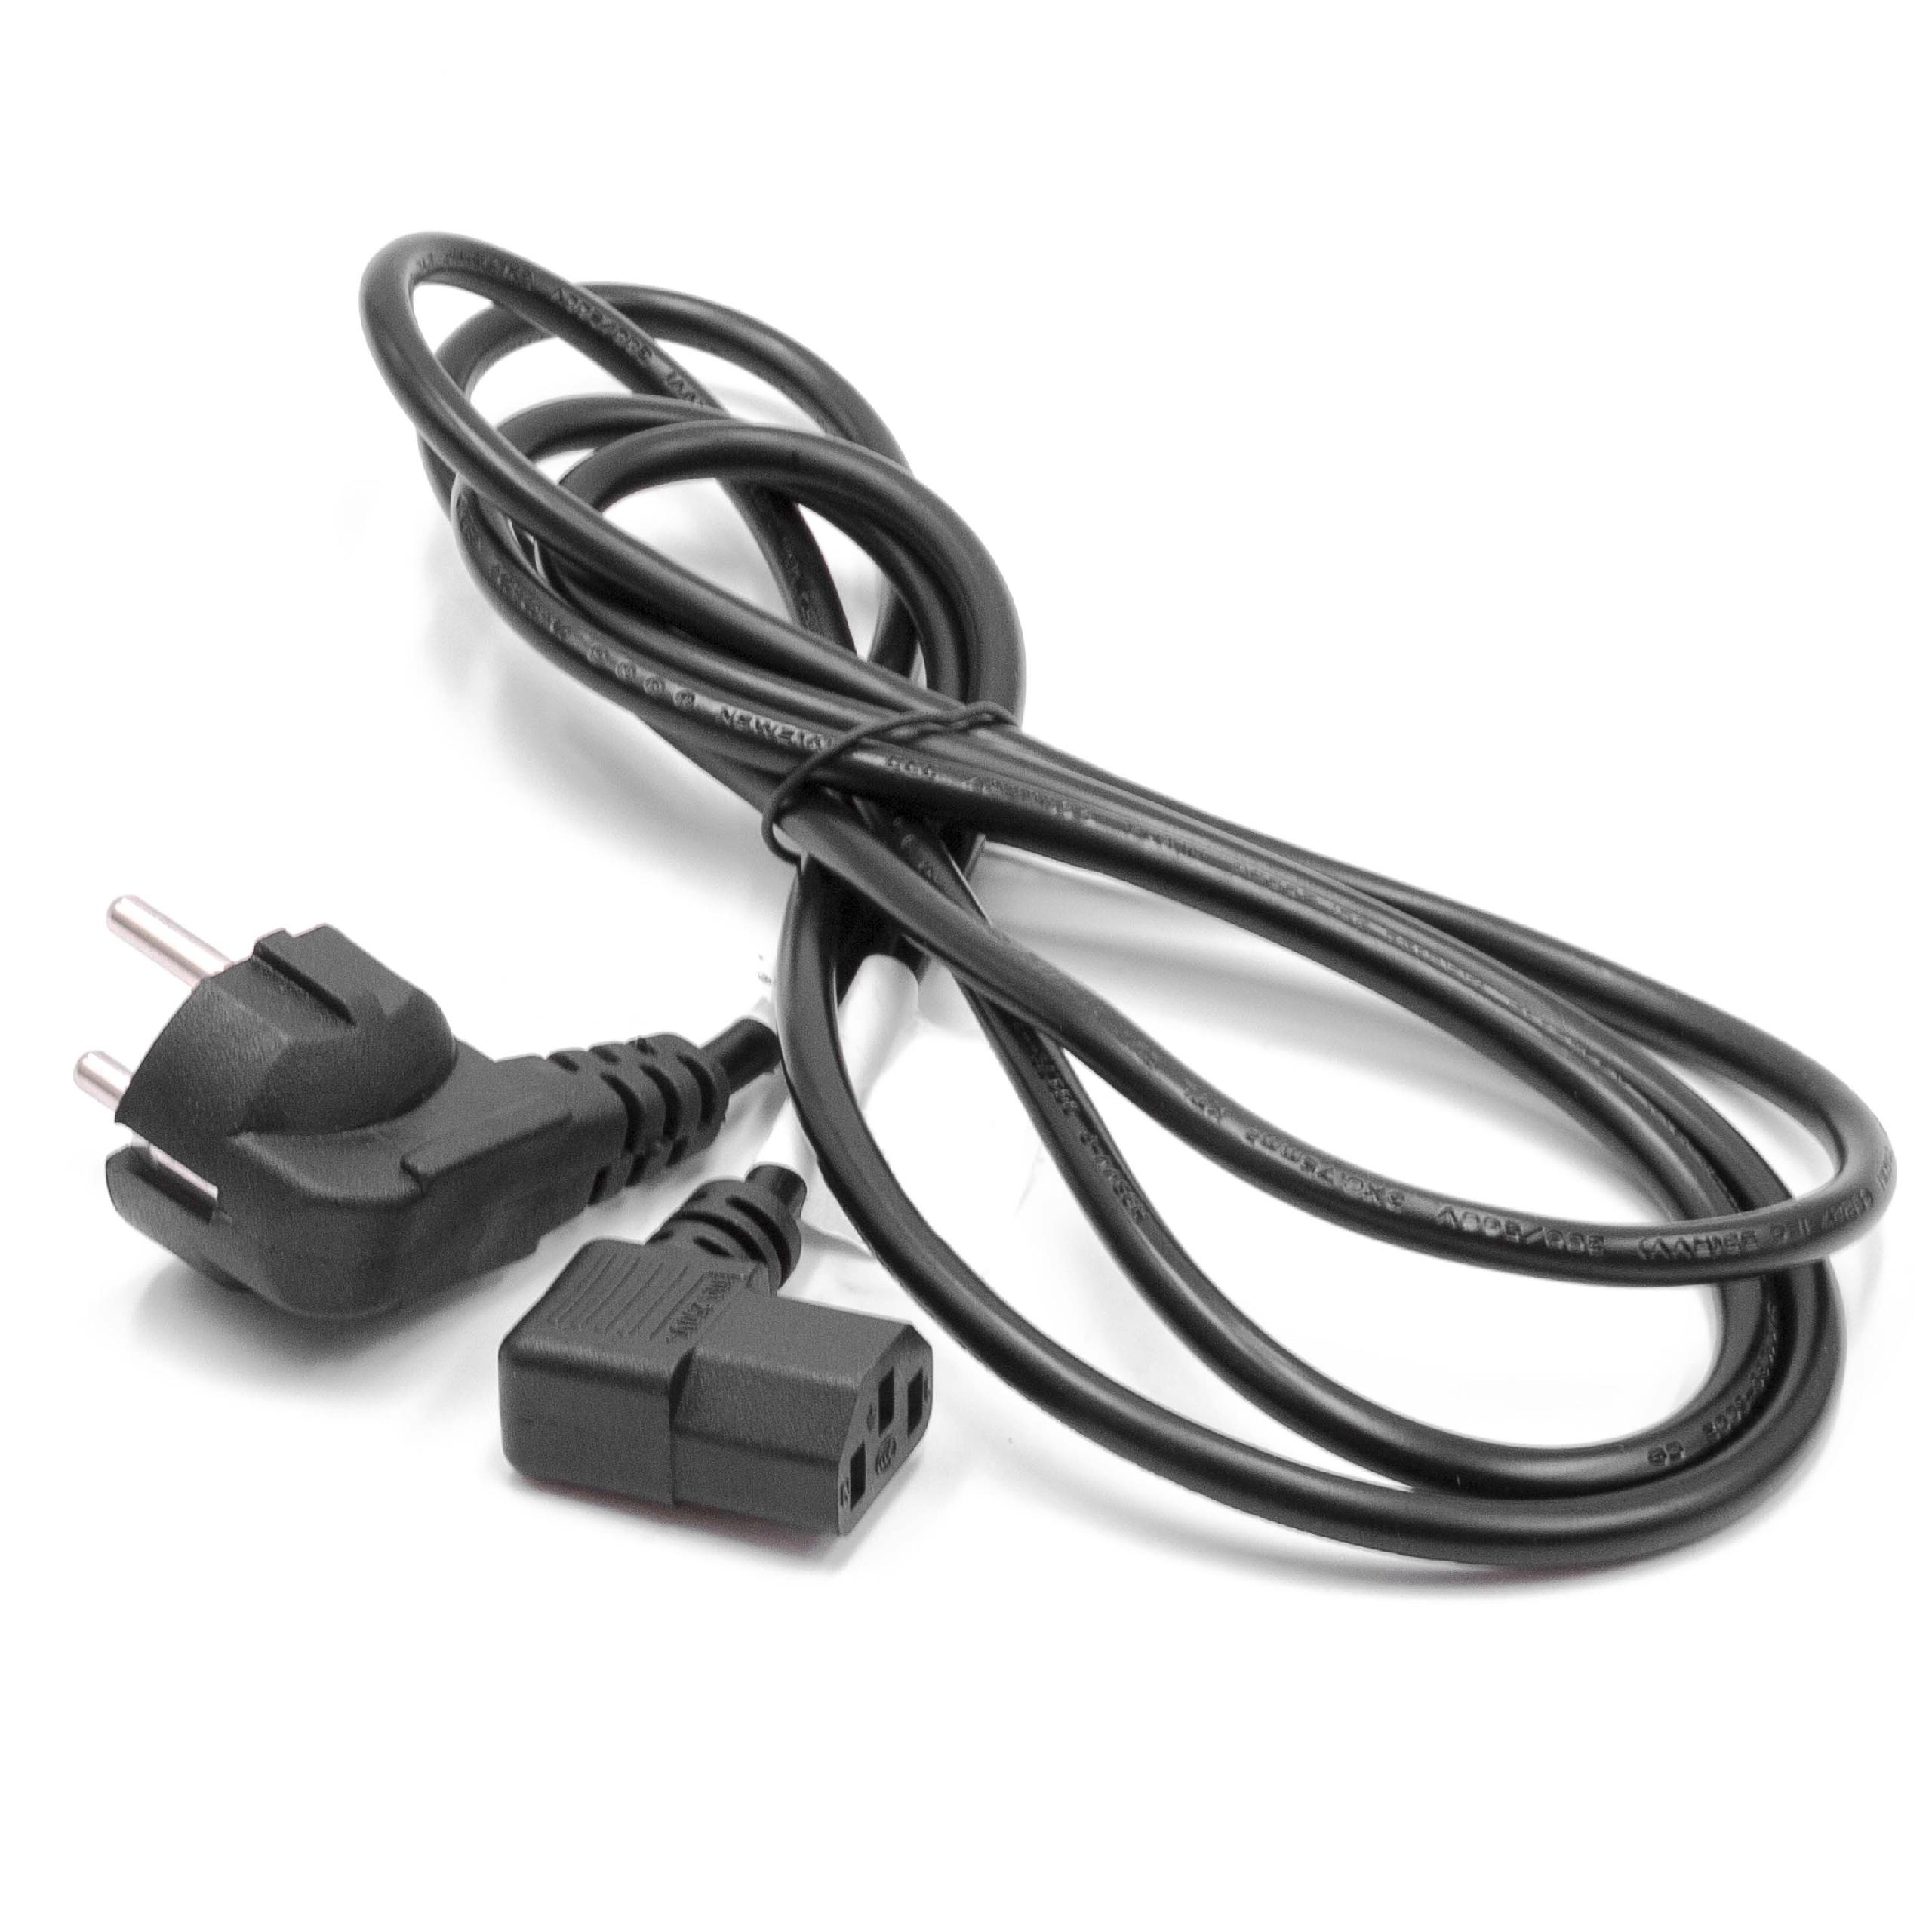 C13 Power Cable Euro Plug suitable for Devices - 2 m, Angled